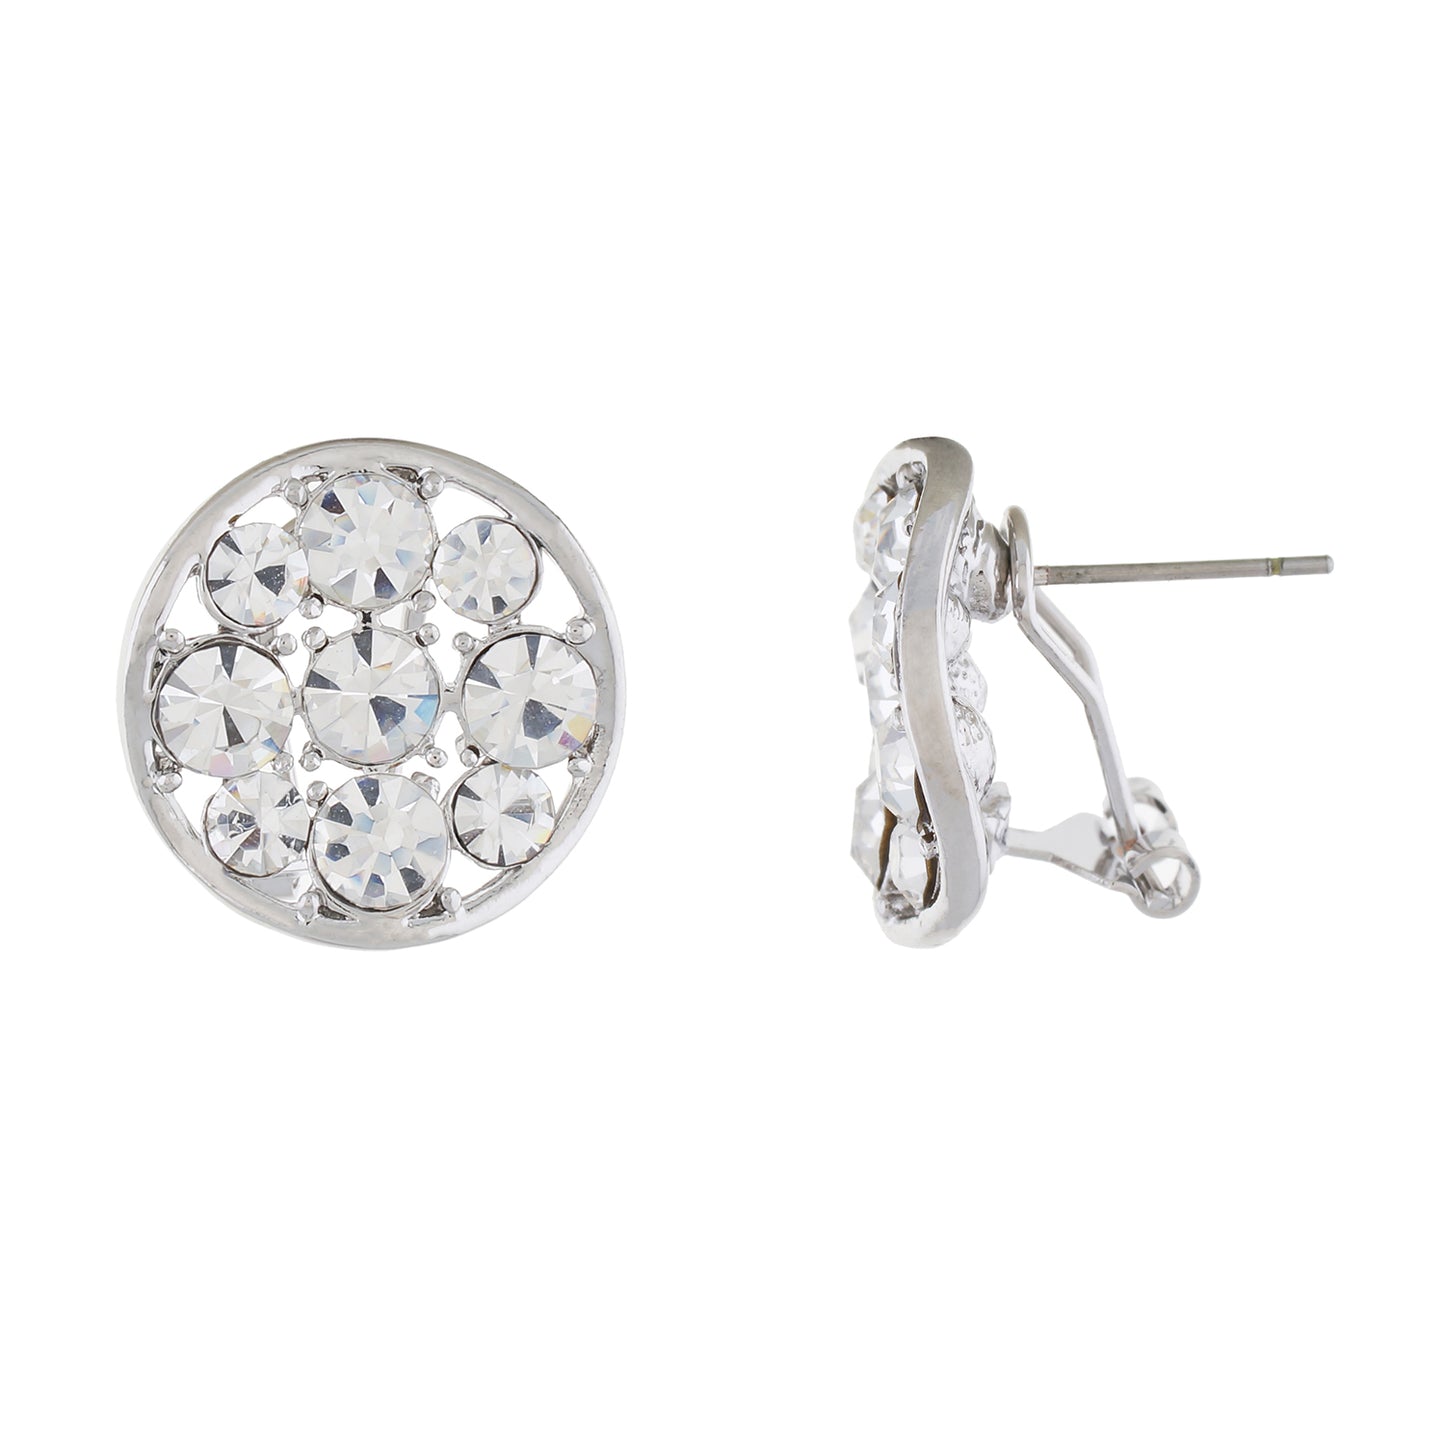 Silver colour Round Design Stud Earrings for Girls and Women